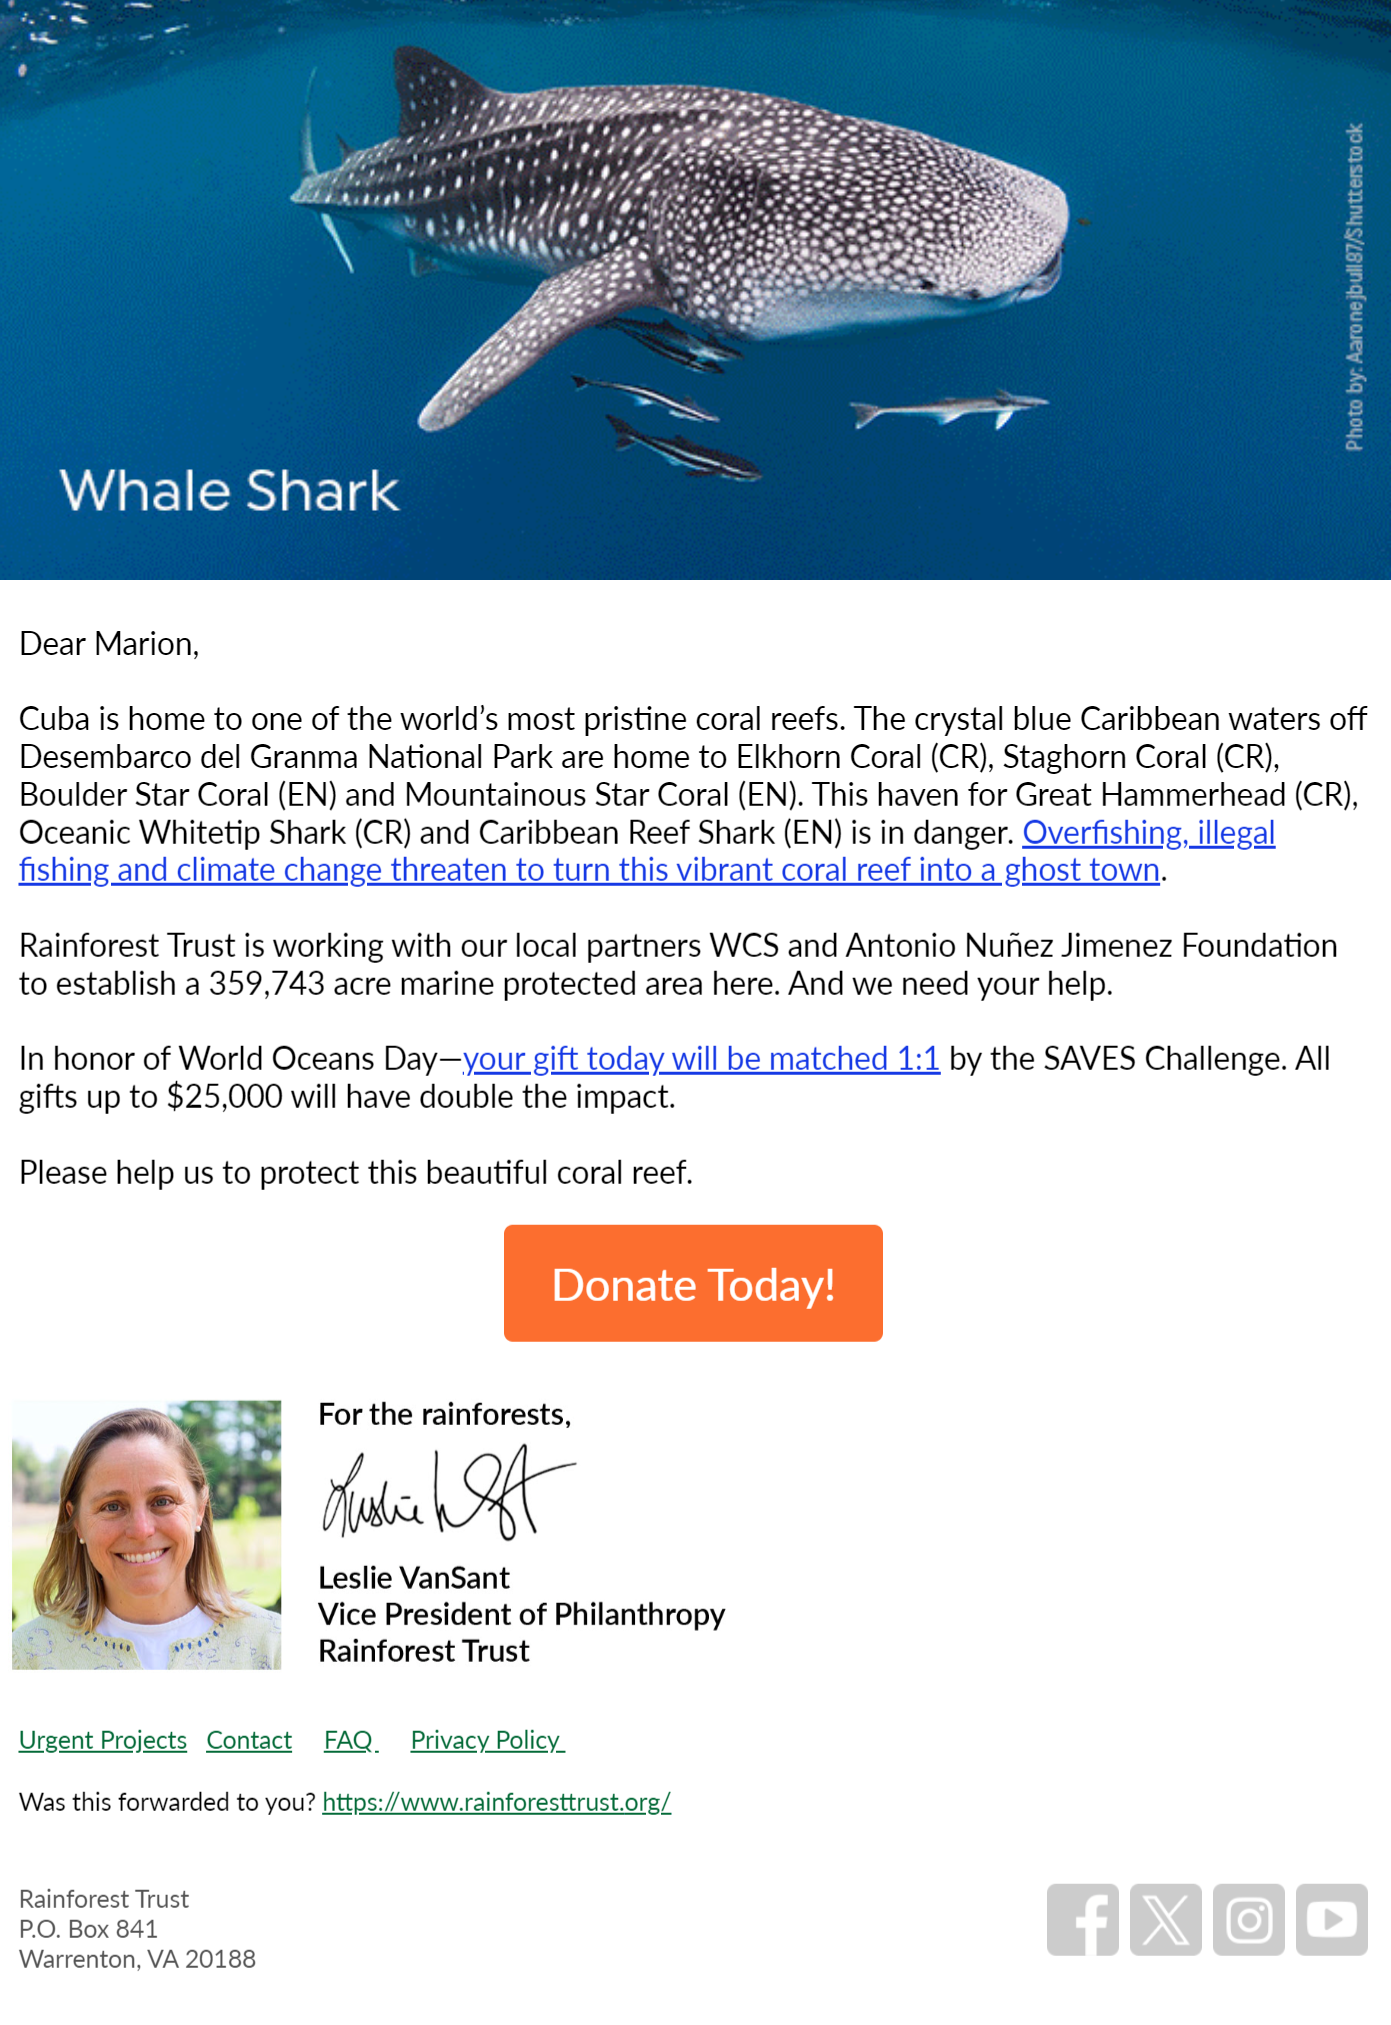 Double Your Impact - Protect Cuba’s Sharks And Coral